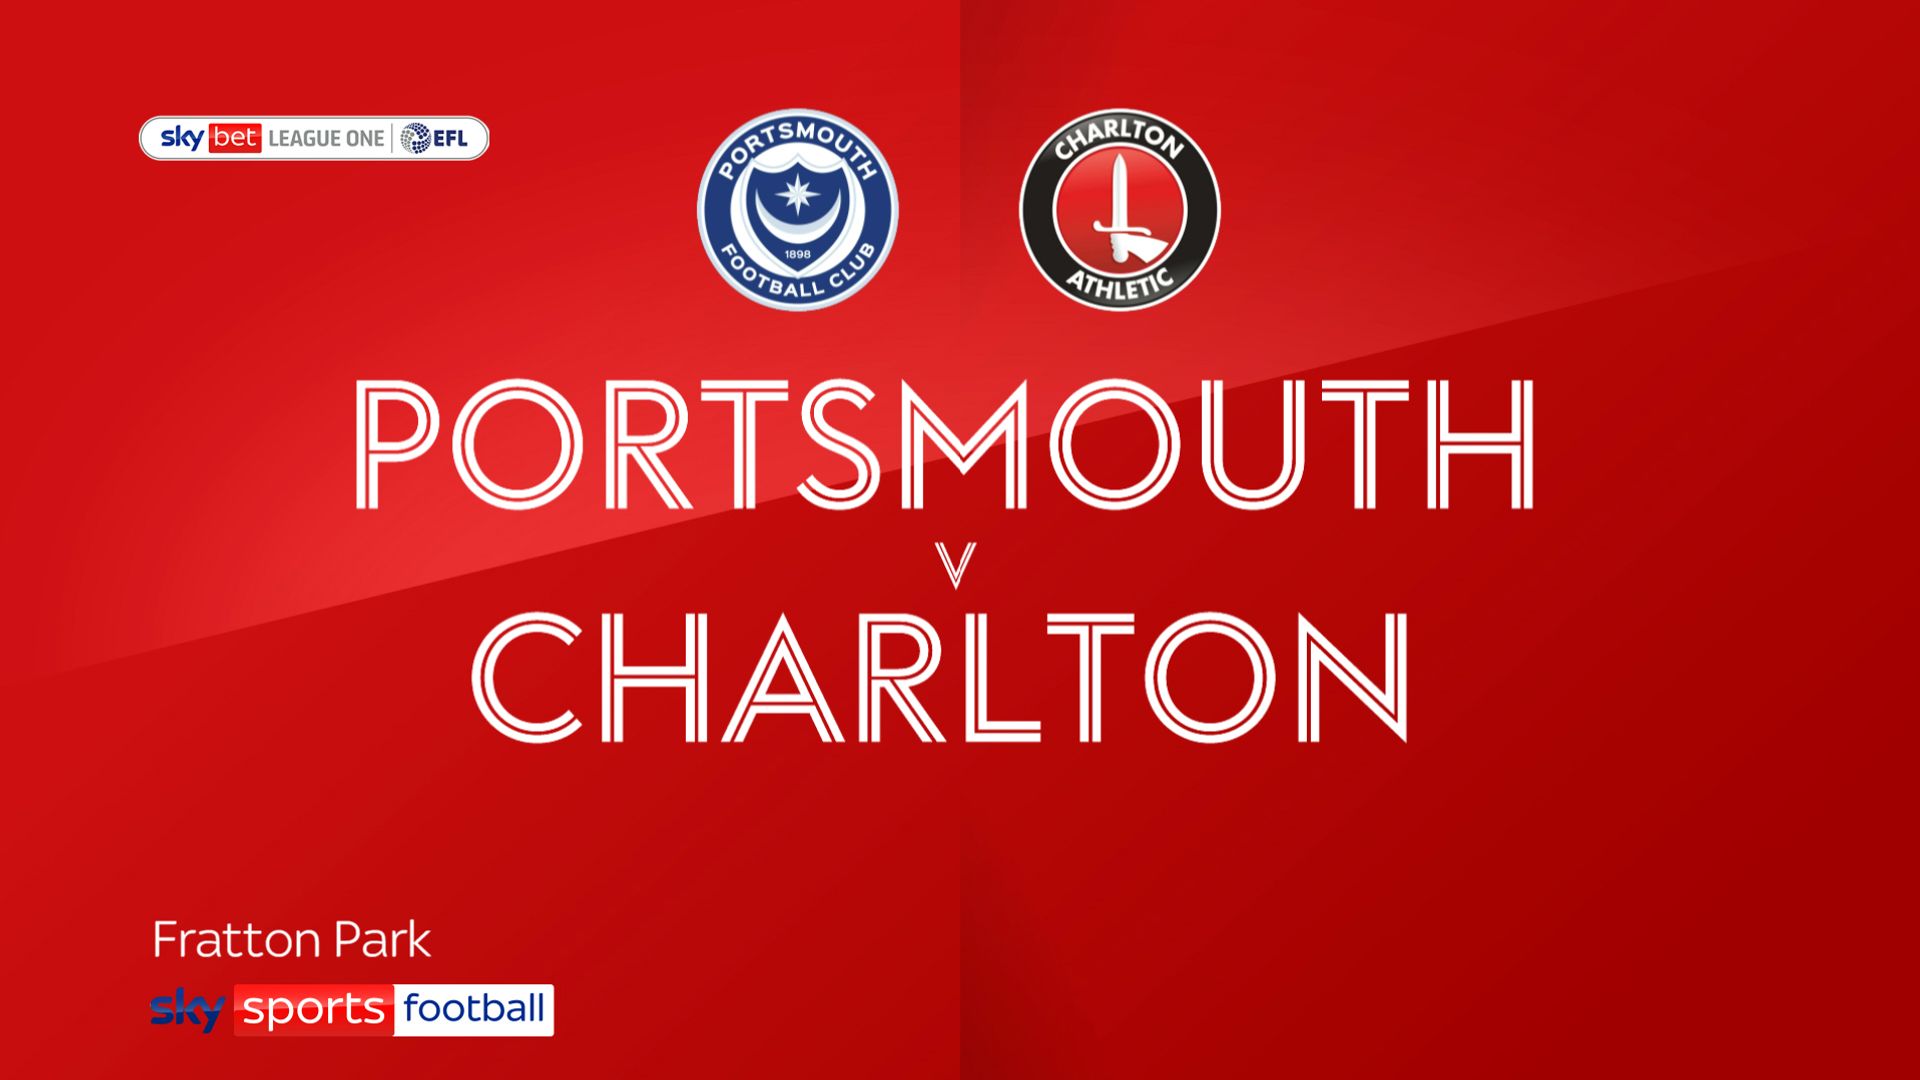 Holden earns first win as Charlton boss over Portsmouth